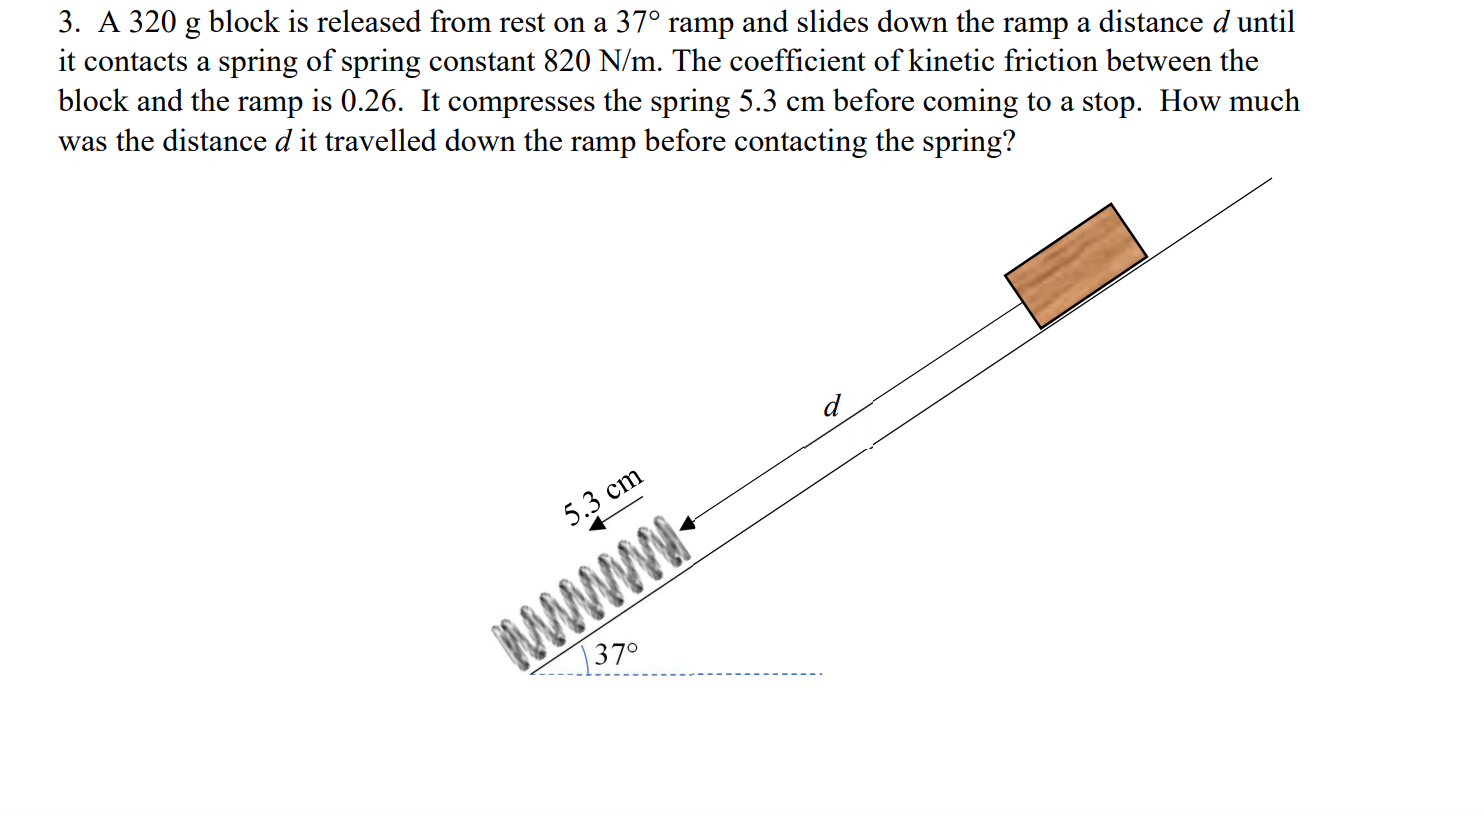 3. A 320 g block is released from rest on a 37° ramp and slides down the ramp a distance d until
it contacts a spring of spring constant 820 N/m. The coefficient of kinetic friction between the
block and the ramp is 0.26. It compresses the spring 5.3 cm before coming to a stop. How much
was the distance d it travelled down the ramp before contacting the spring?
